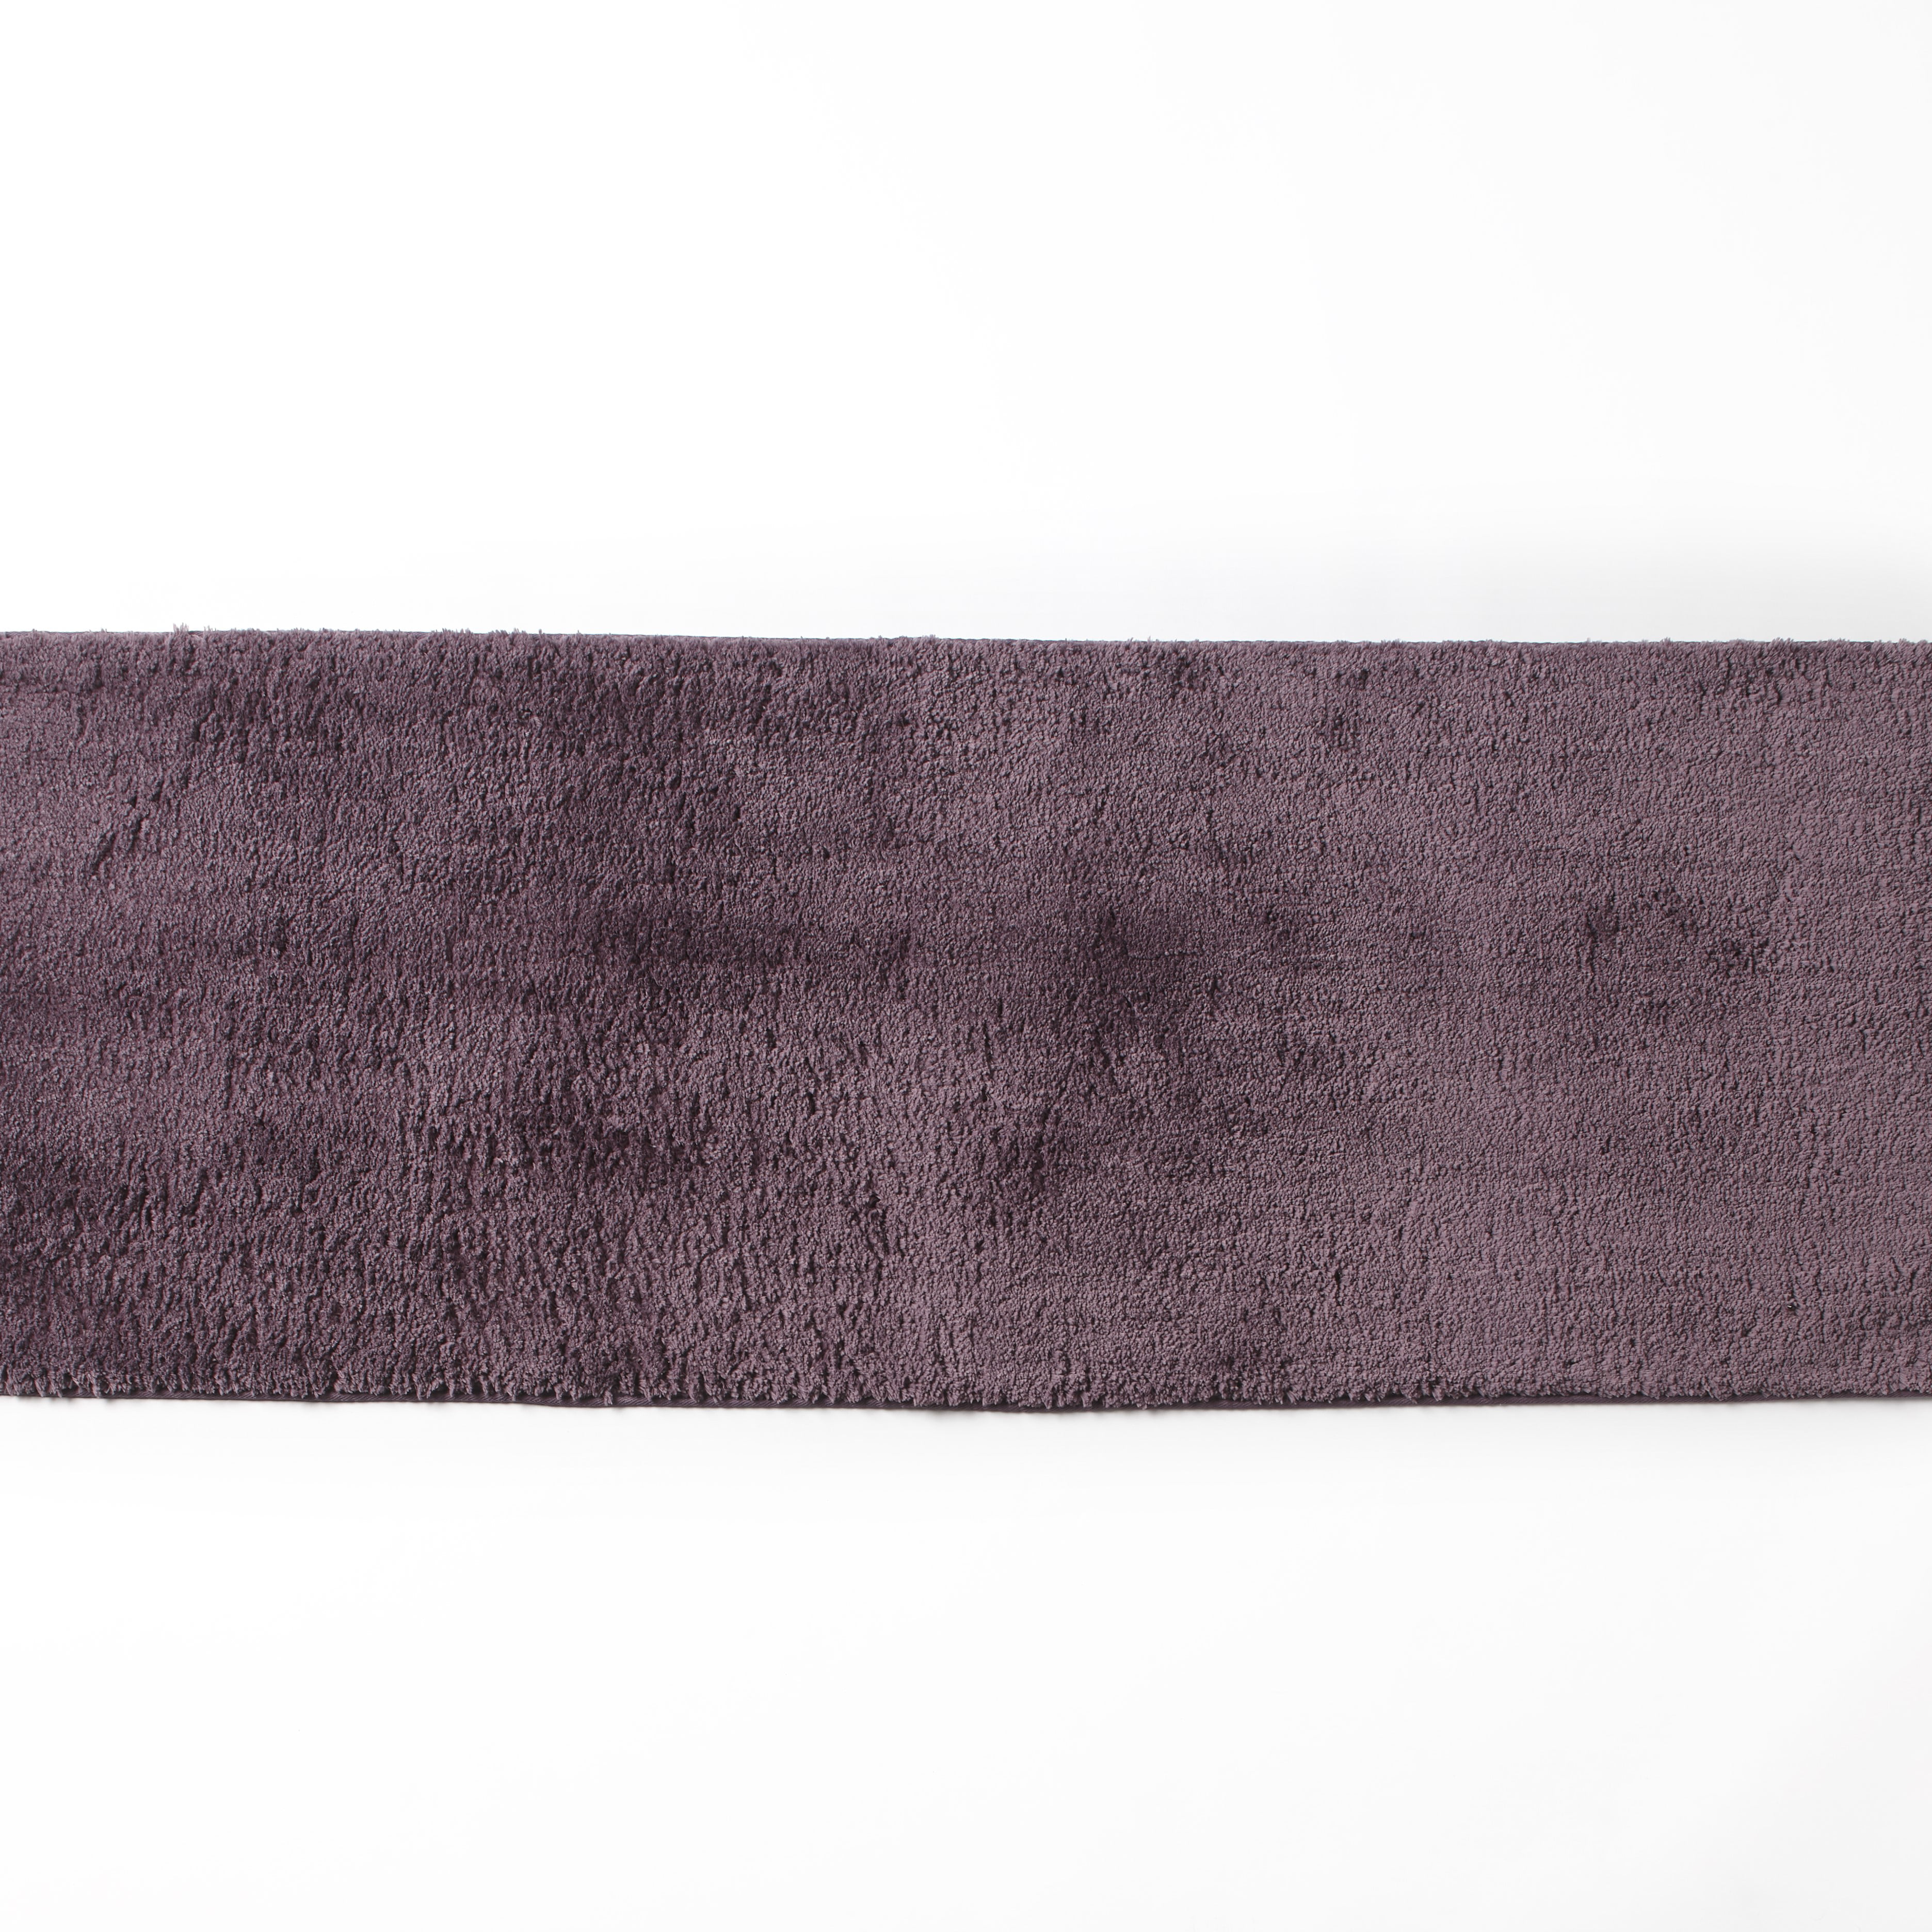 Details about   Microfiber Plush Bath Runner 54" Mat with Nonskid Backing Plum 